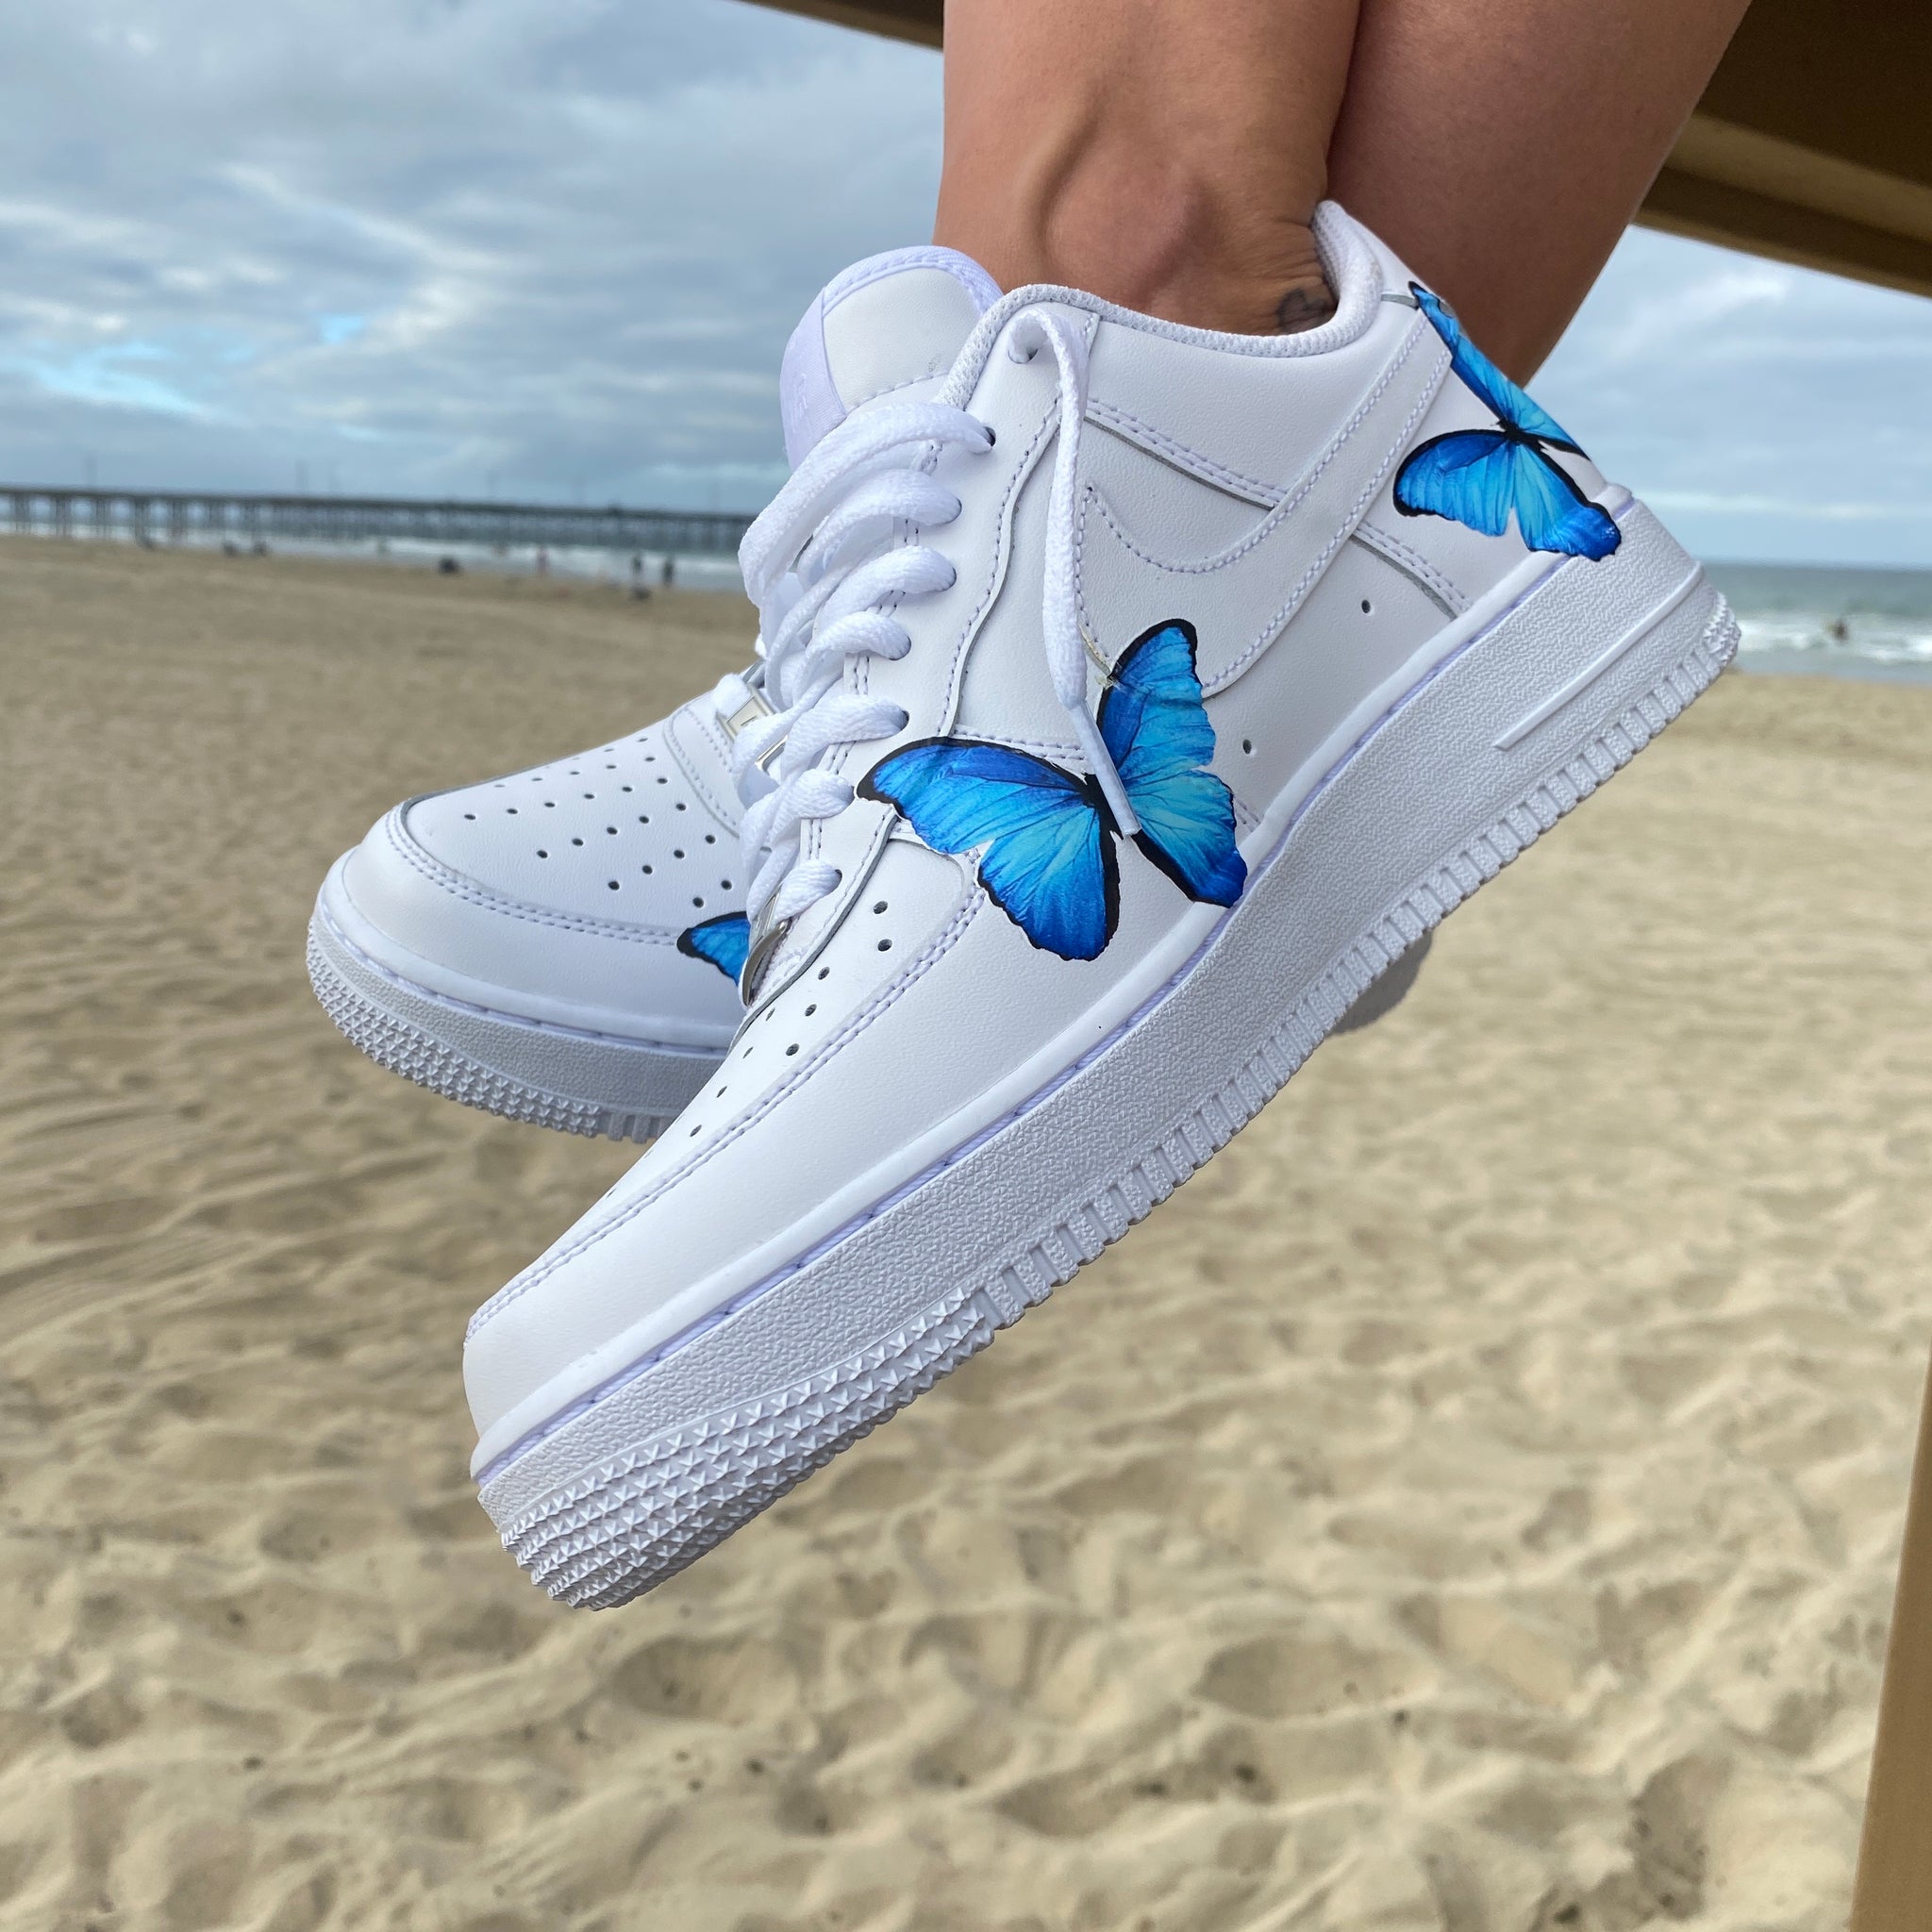 blue butterfly air force ones